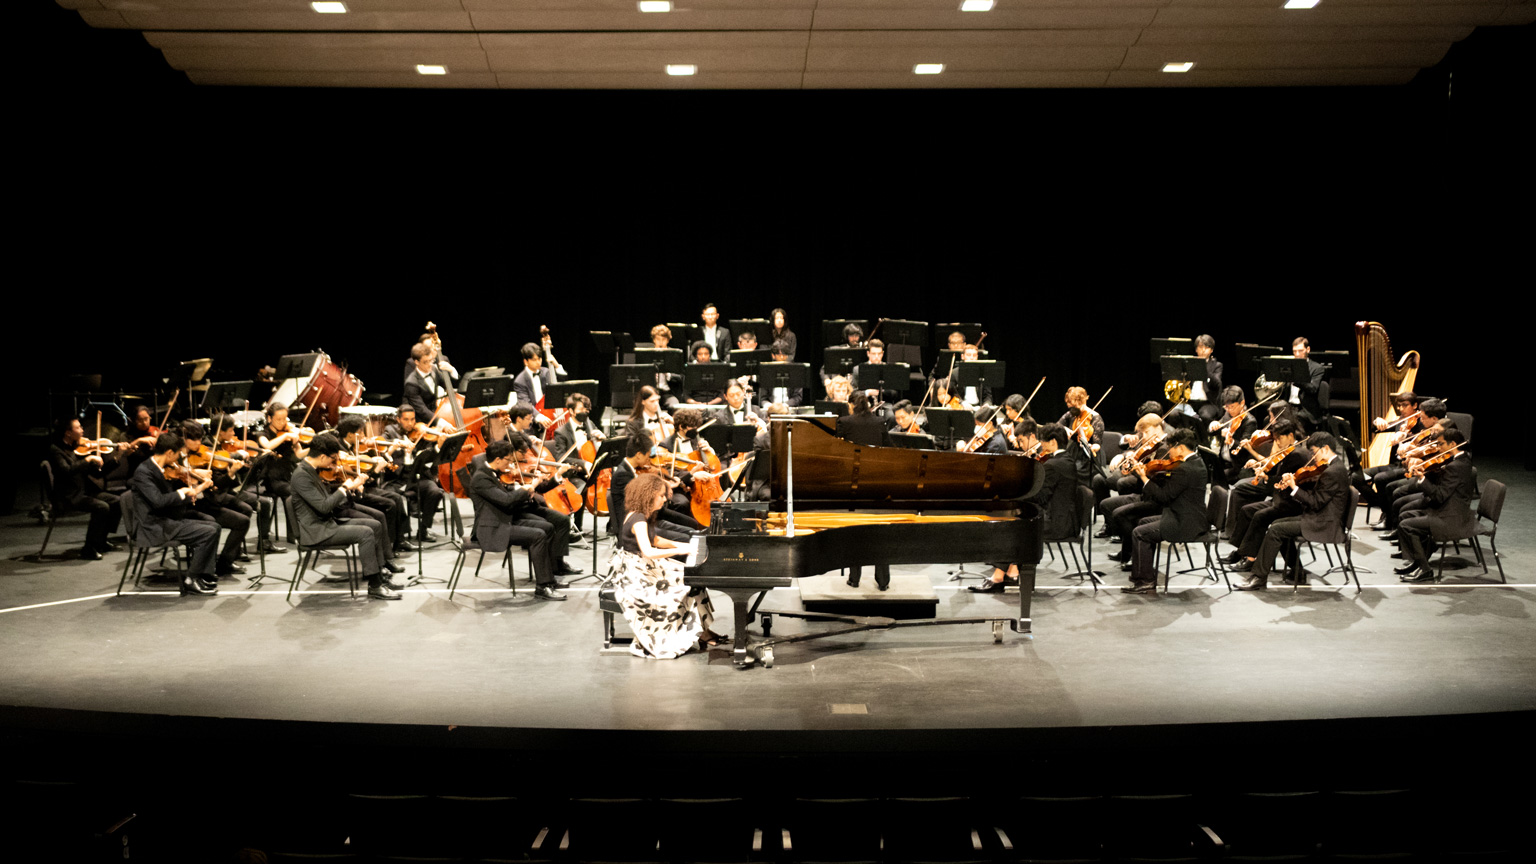 Wide view of symphony orchestra with solo pianist in front